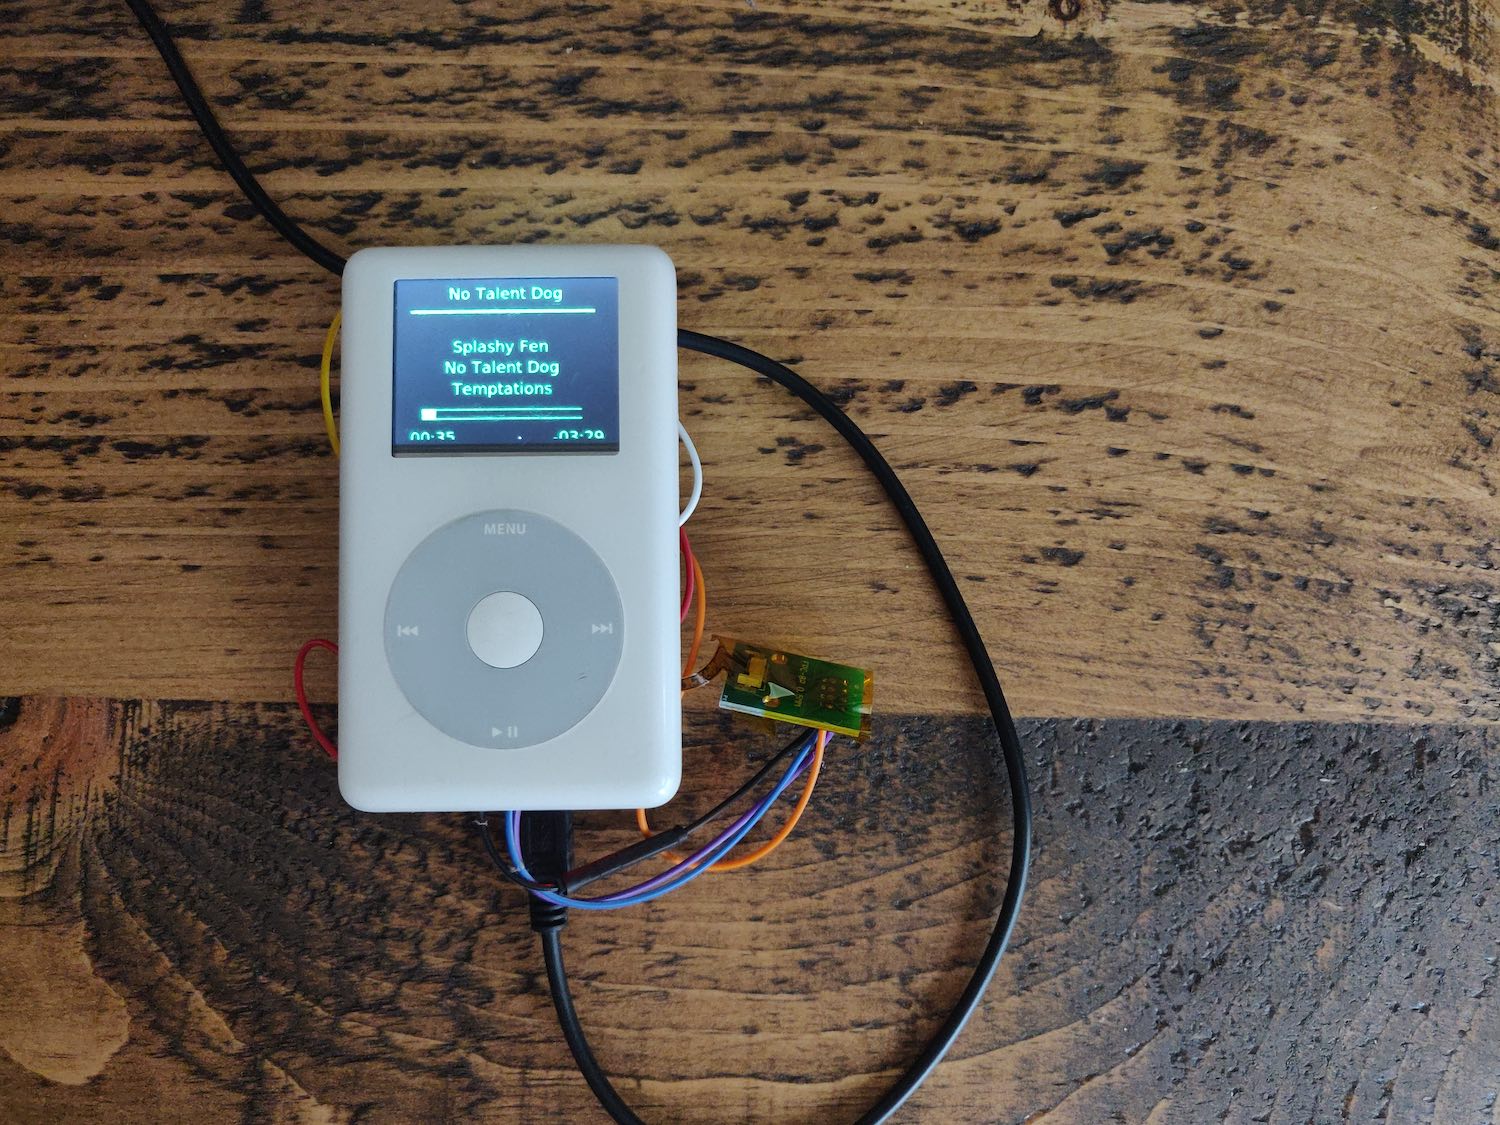 download the last version for ipod Spotify 1.2.16.947